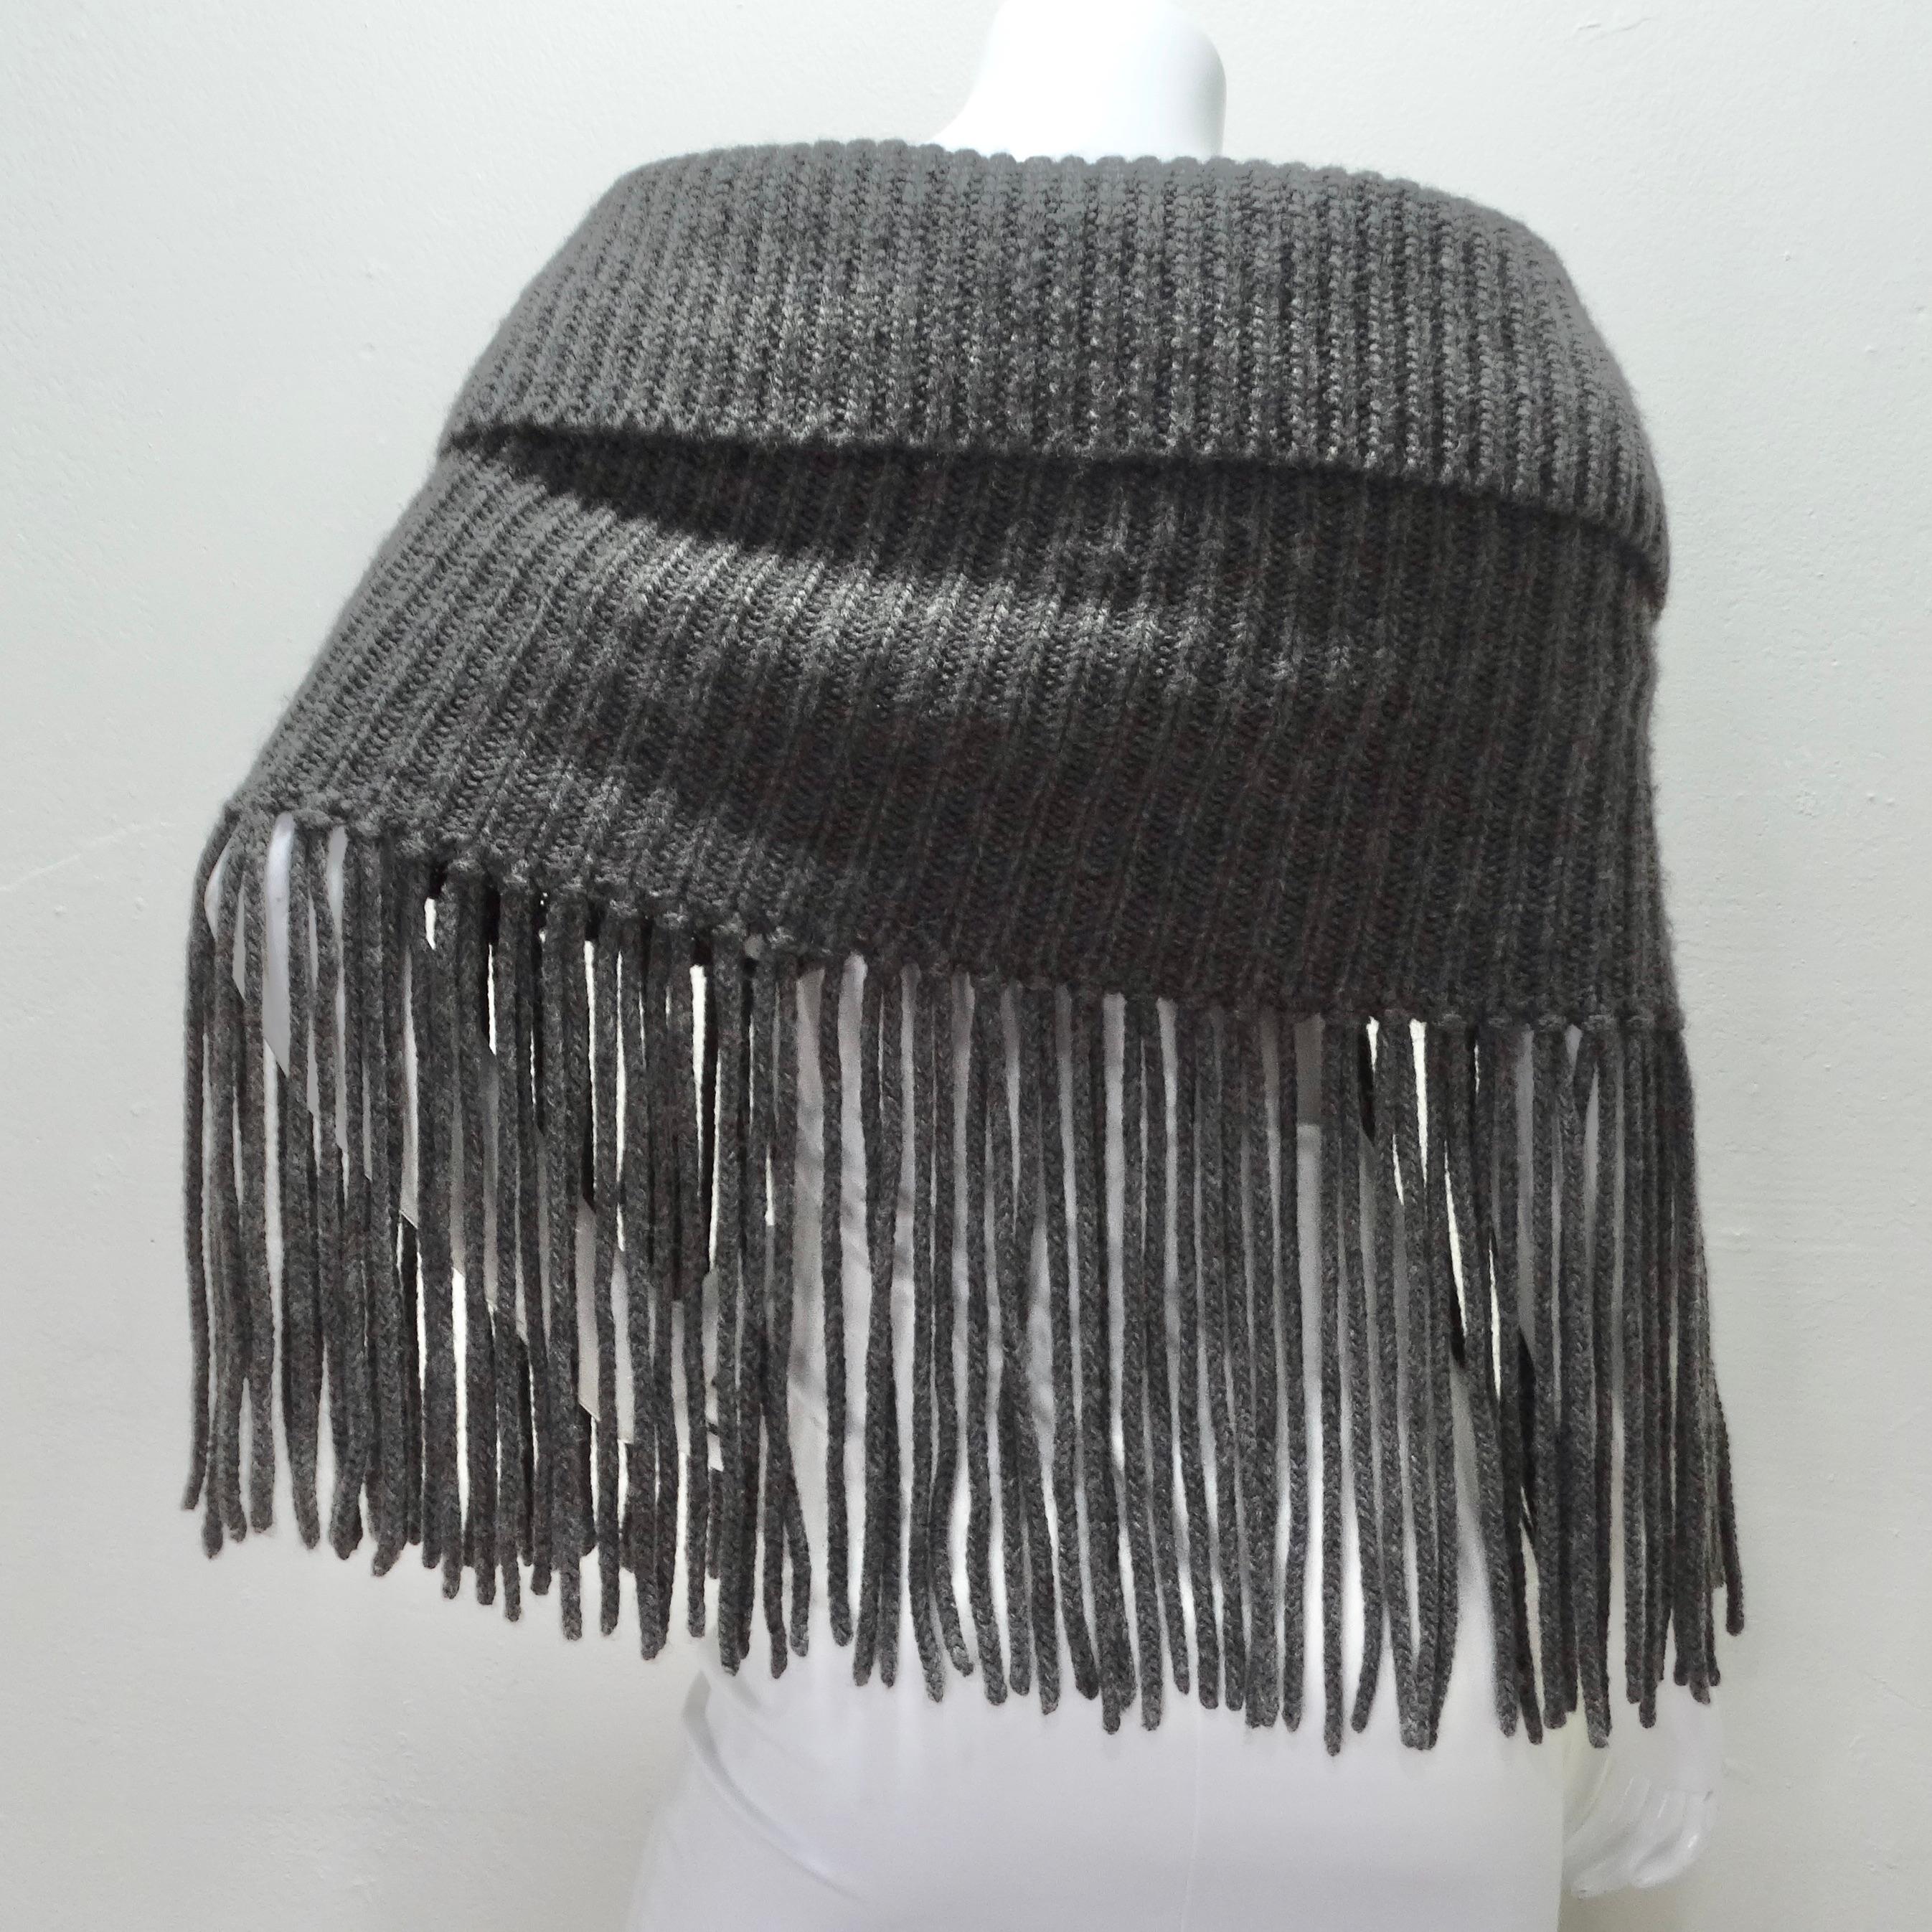 Gucci Alpaca Fringe Knit Poncho In Excellent Condition For Sale In Scottsdale, AZ